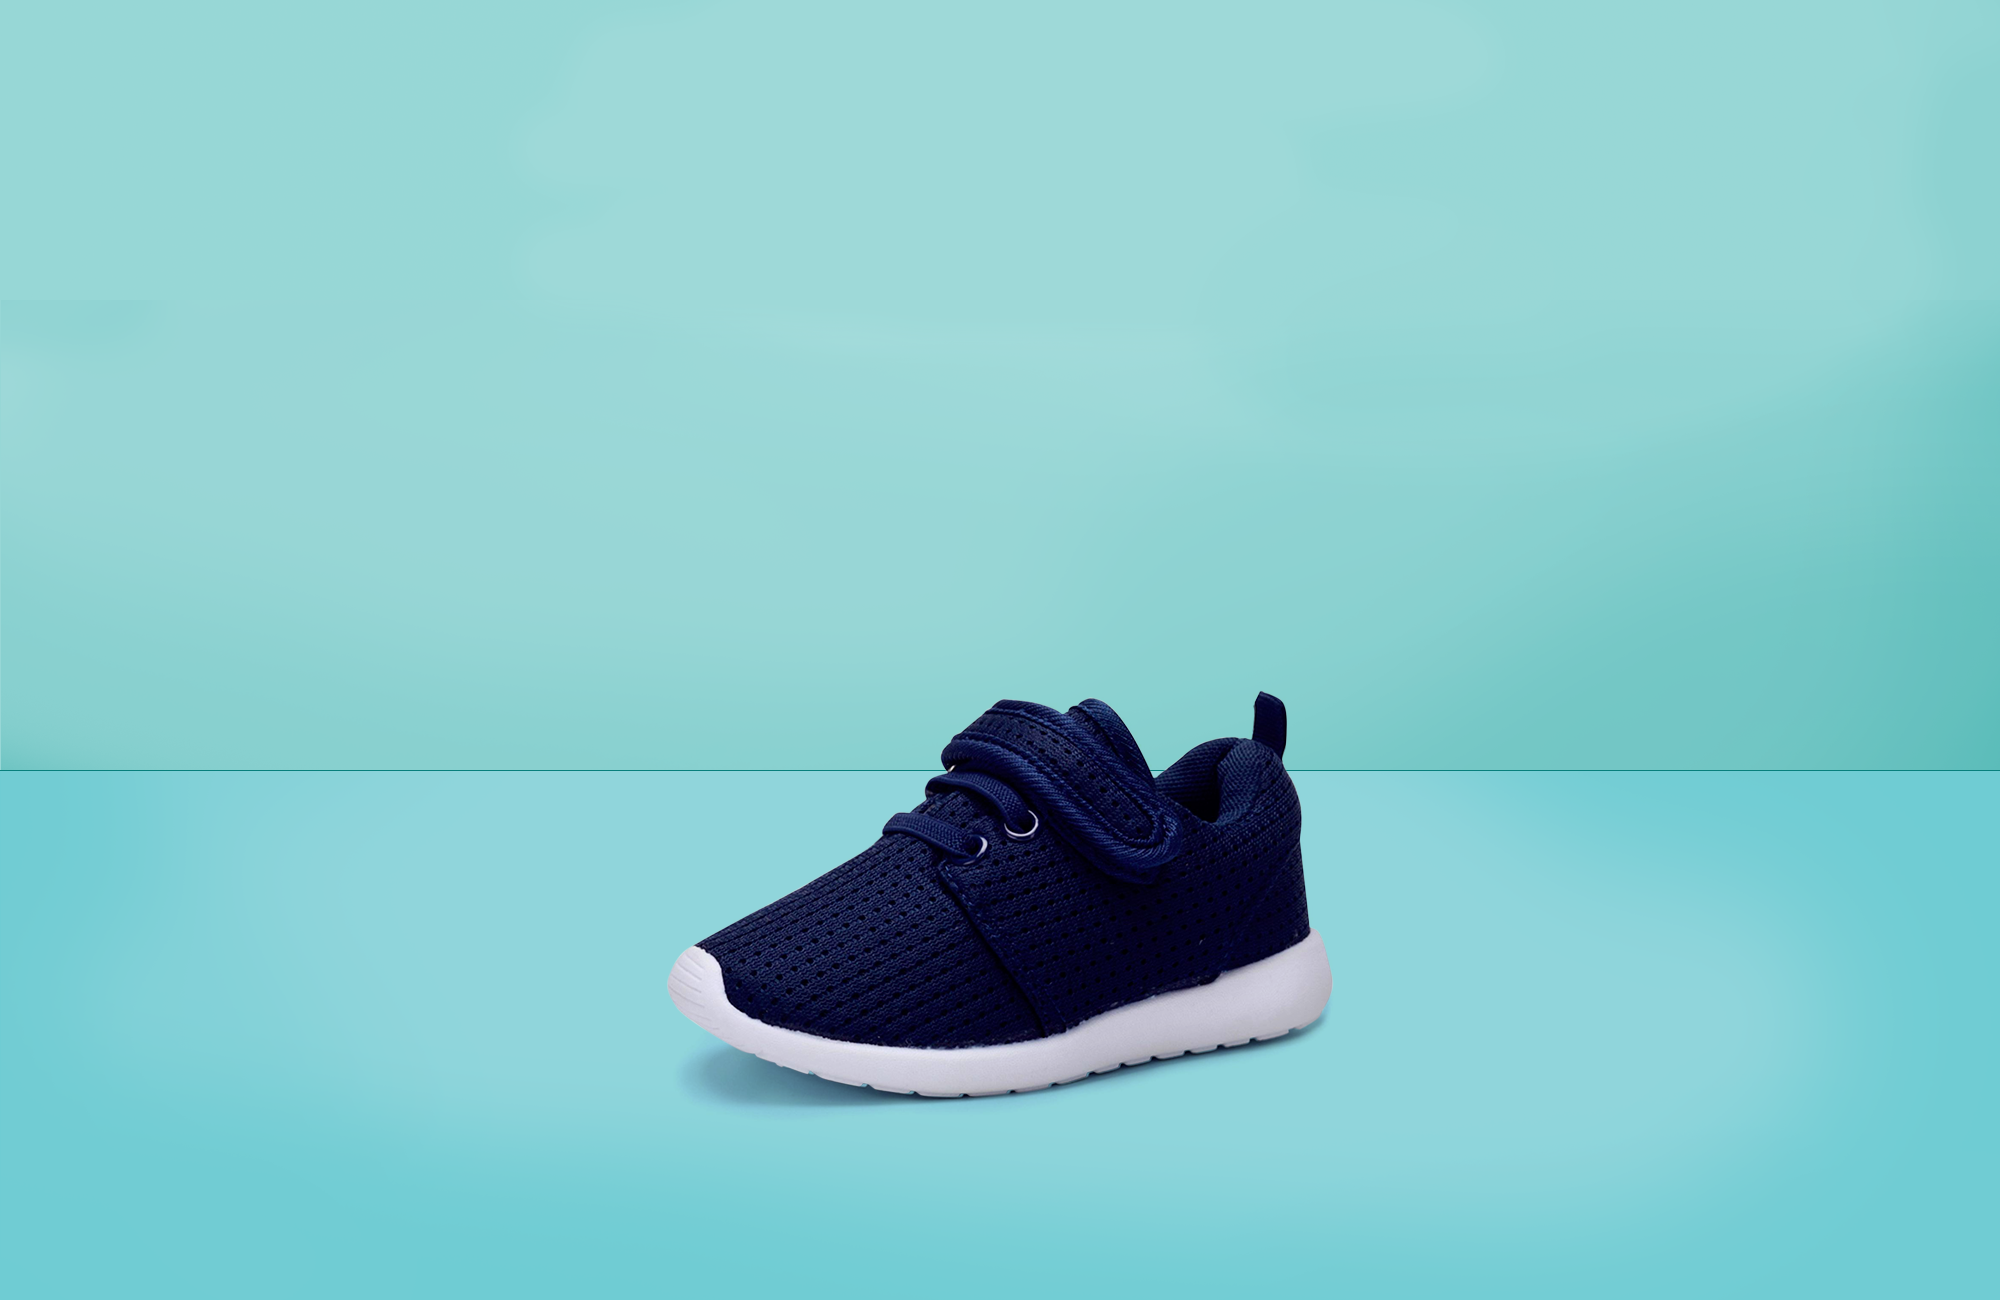 Spuug uit zoon namens 10 Best Kids Sneakers - Children's Shoes for Boys and Girls